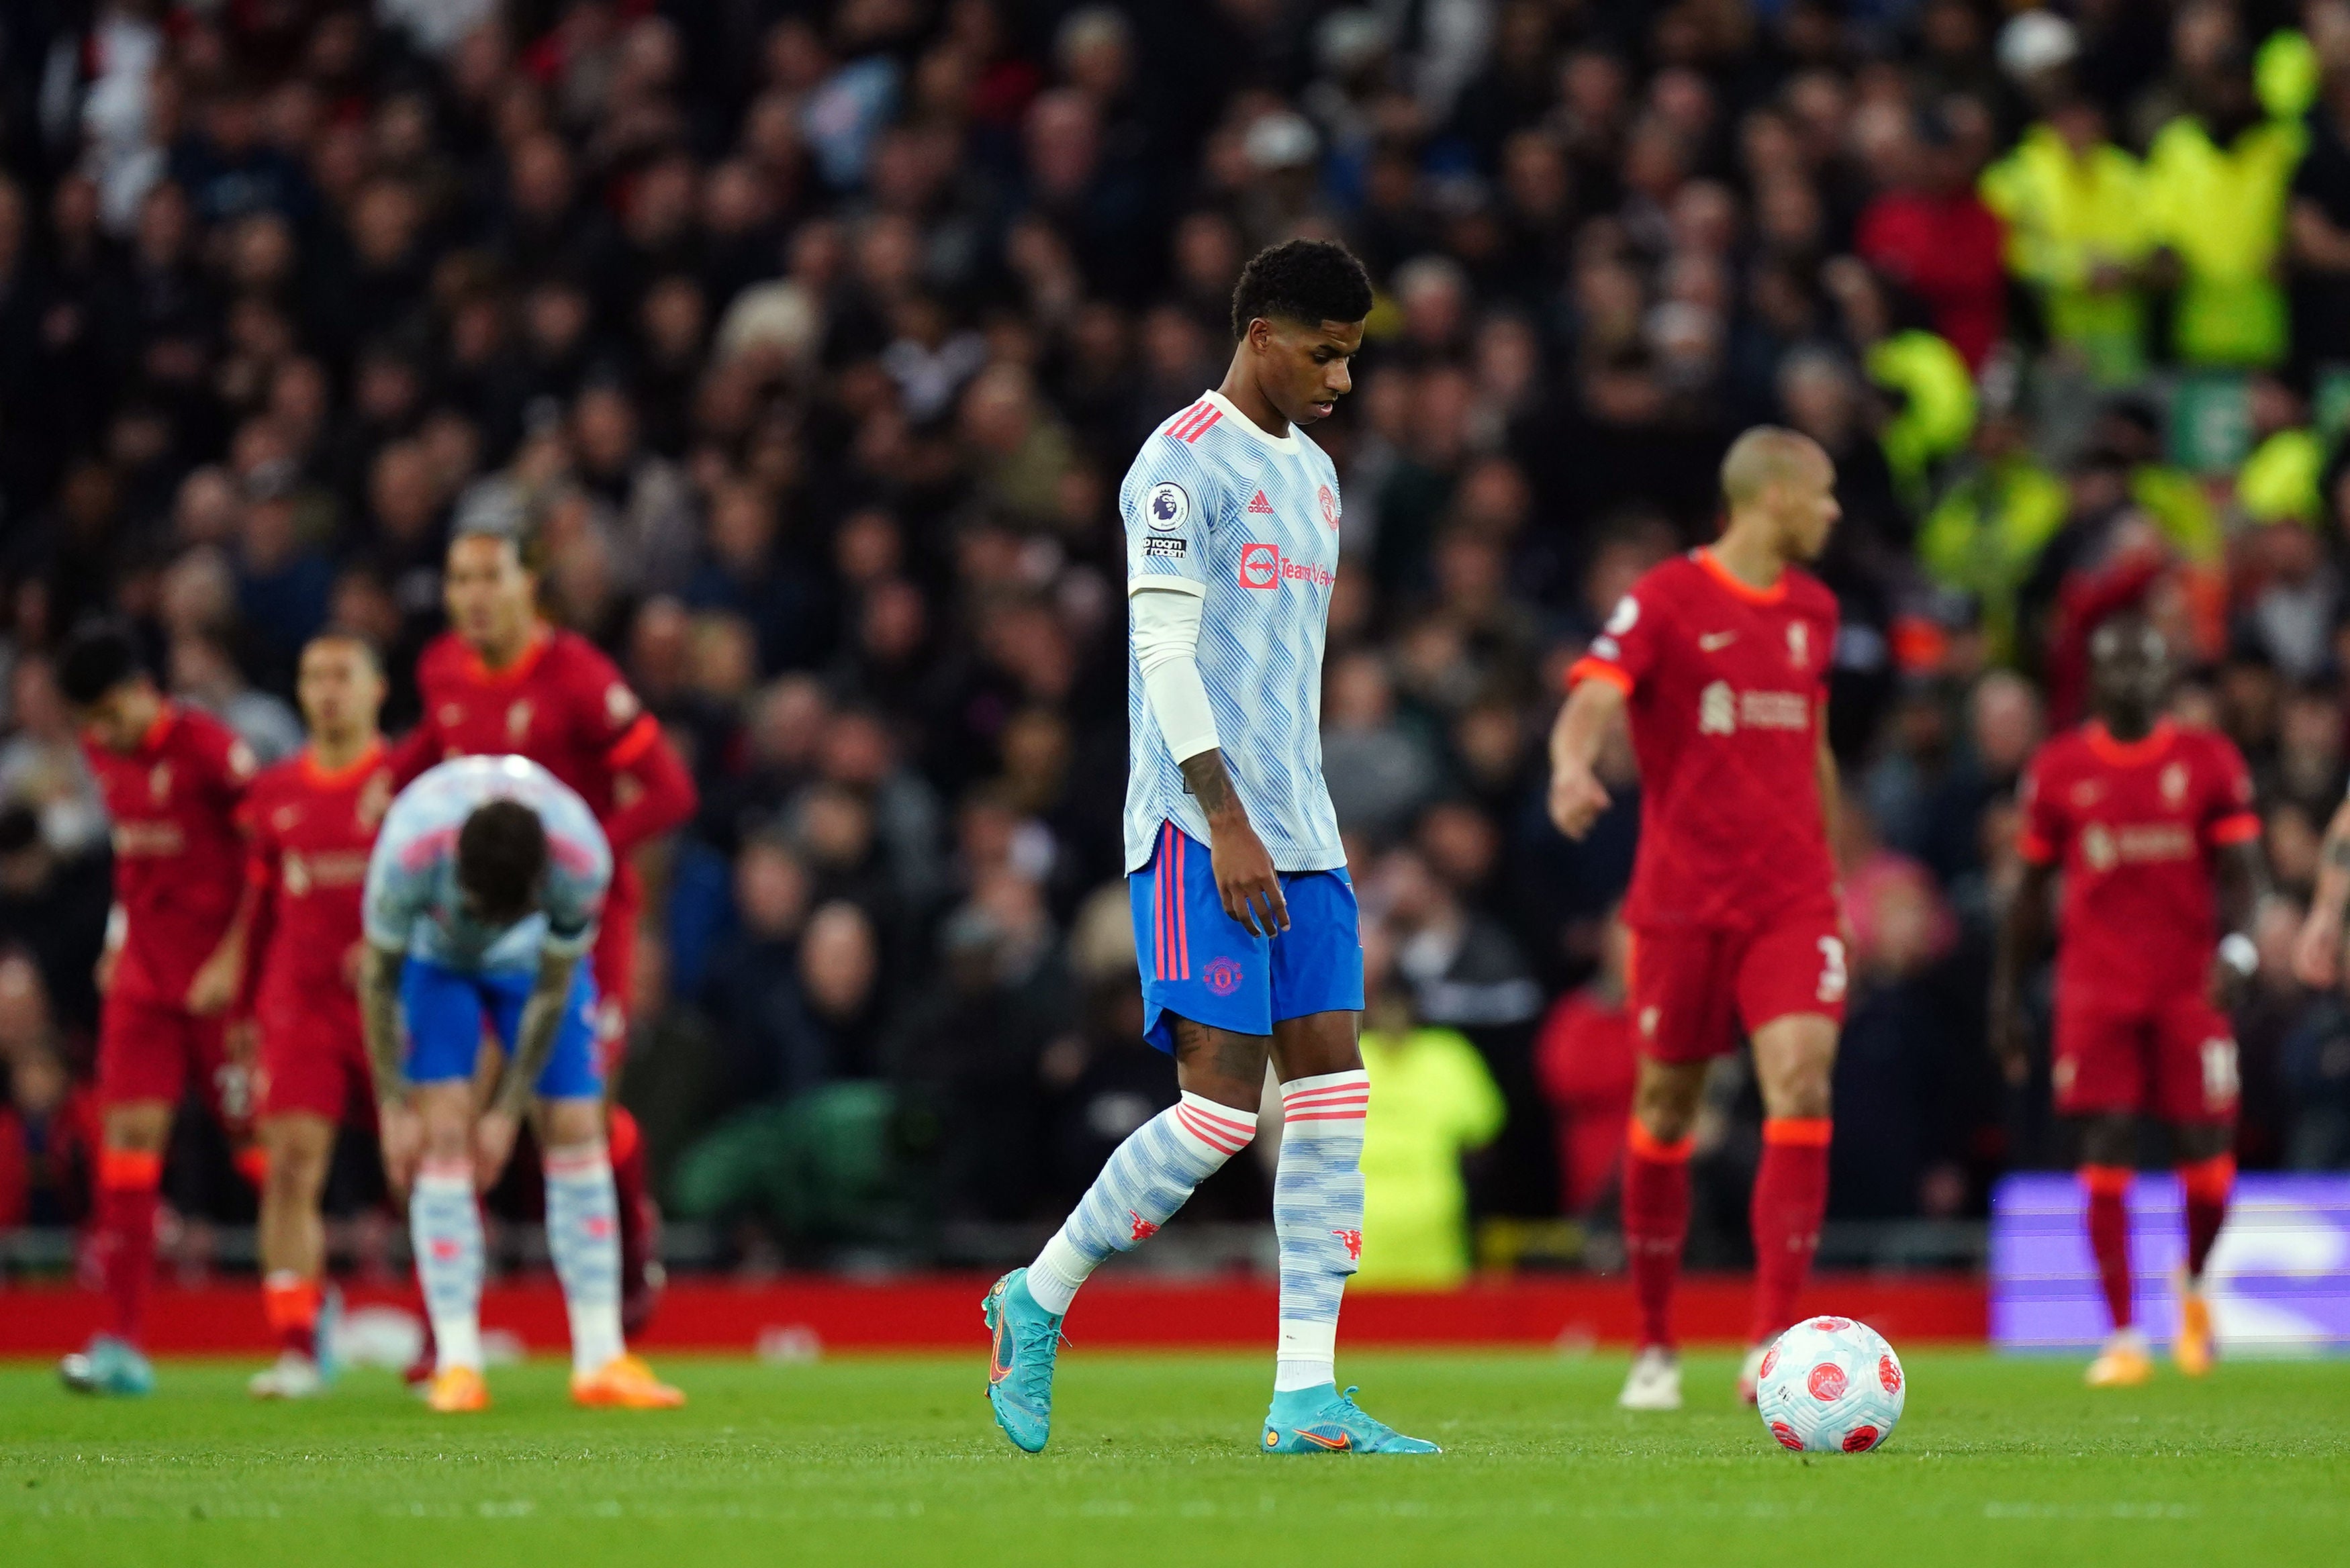 It has been a season of disappointment for United and a number of their players